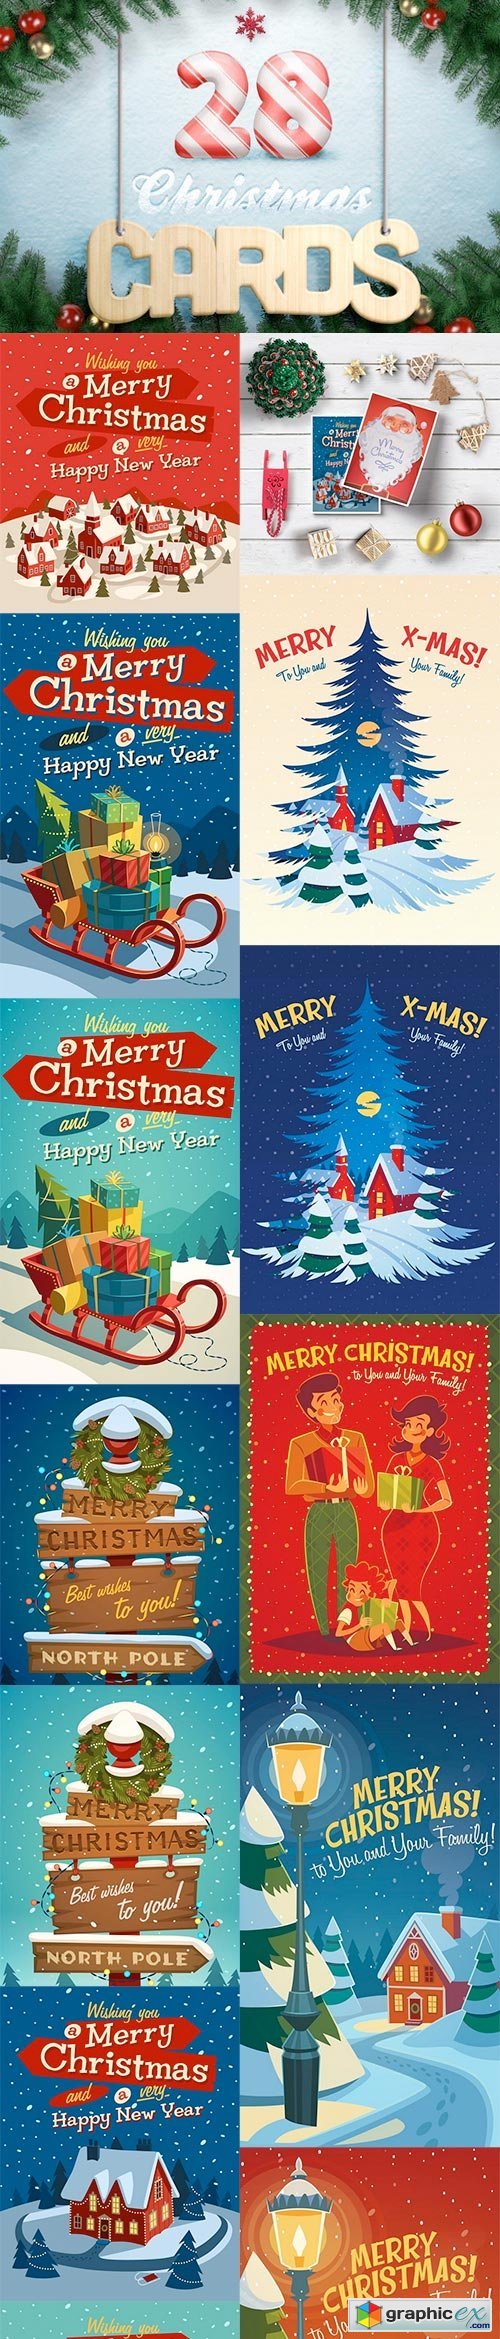 28 Christmas Cards Illustrations